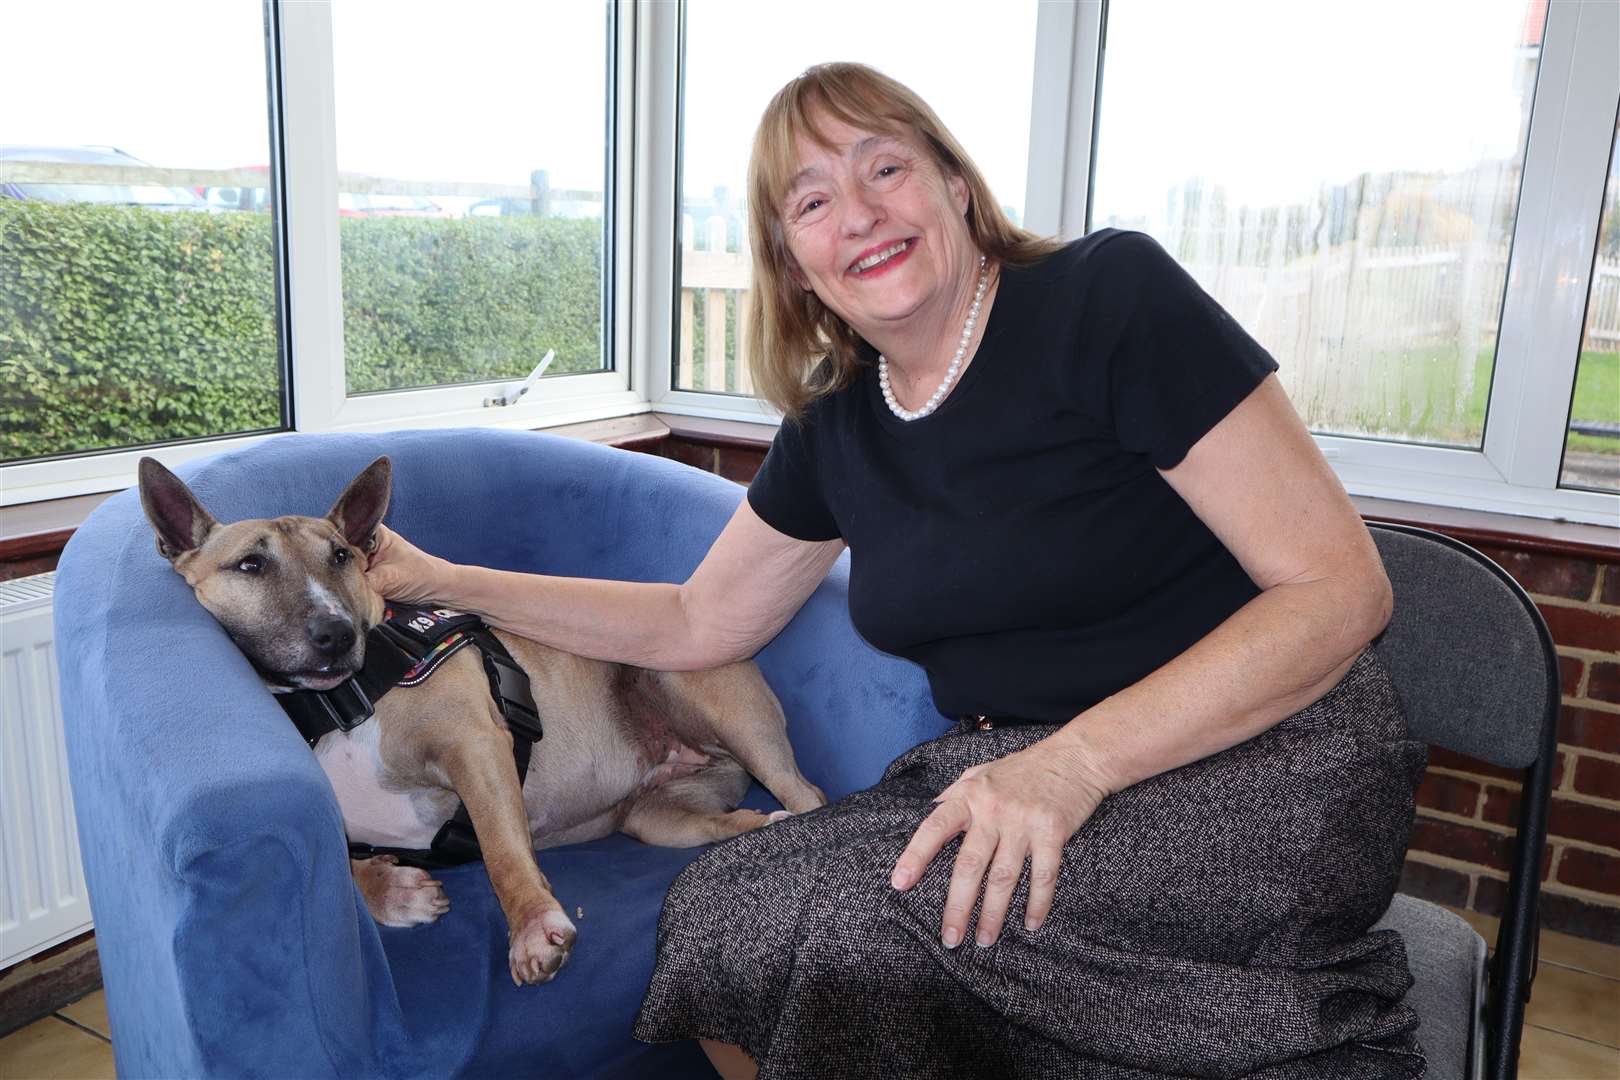 Former nurse and chief executive Jane Bunnett, pictured with her therapy dog Beau, is manager of Little Oyster residential home on The Leas at Minster, Sheppey